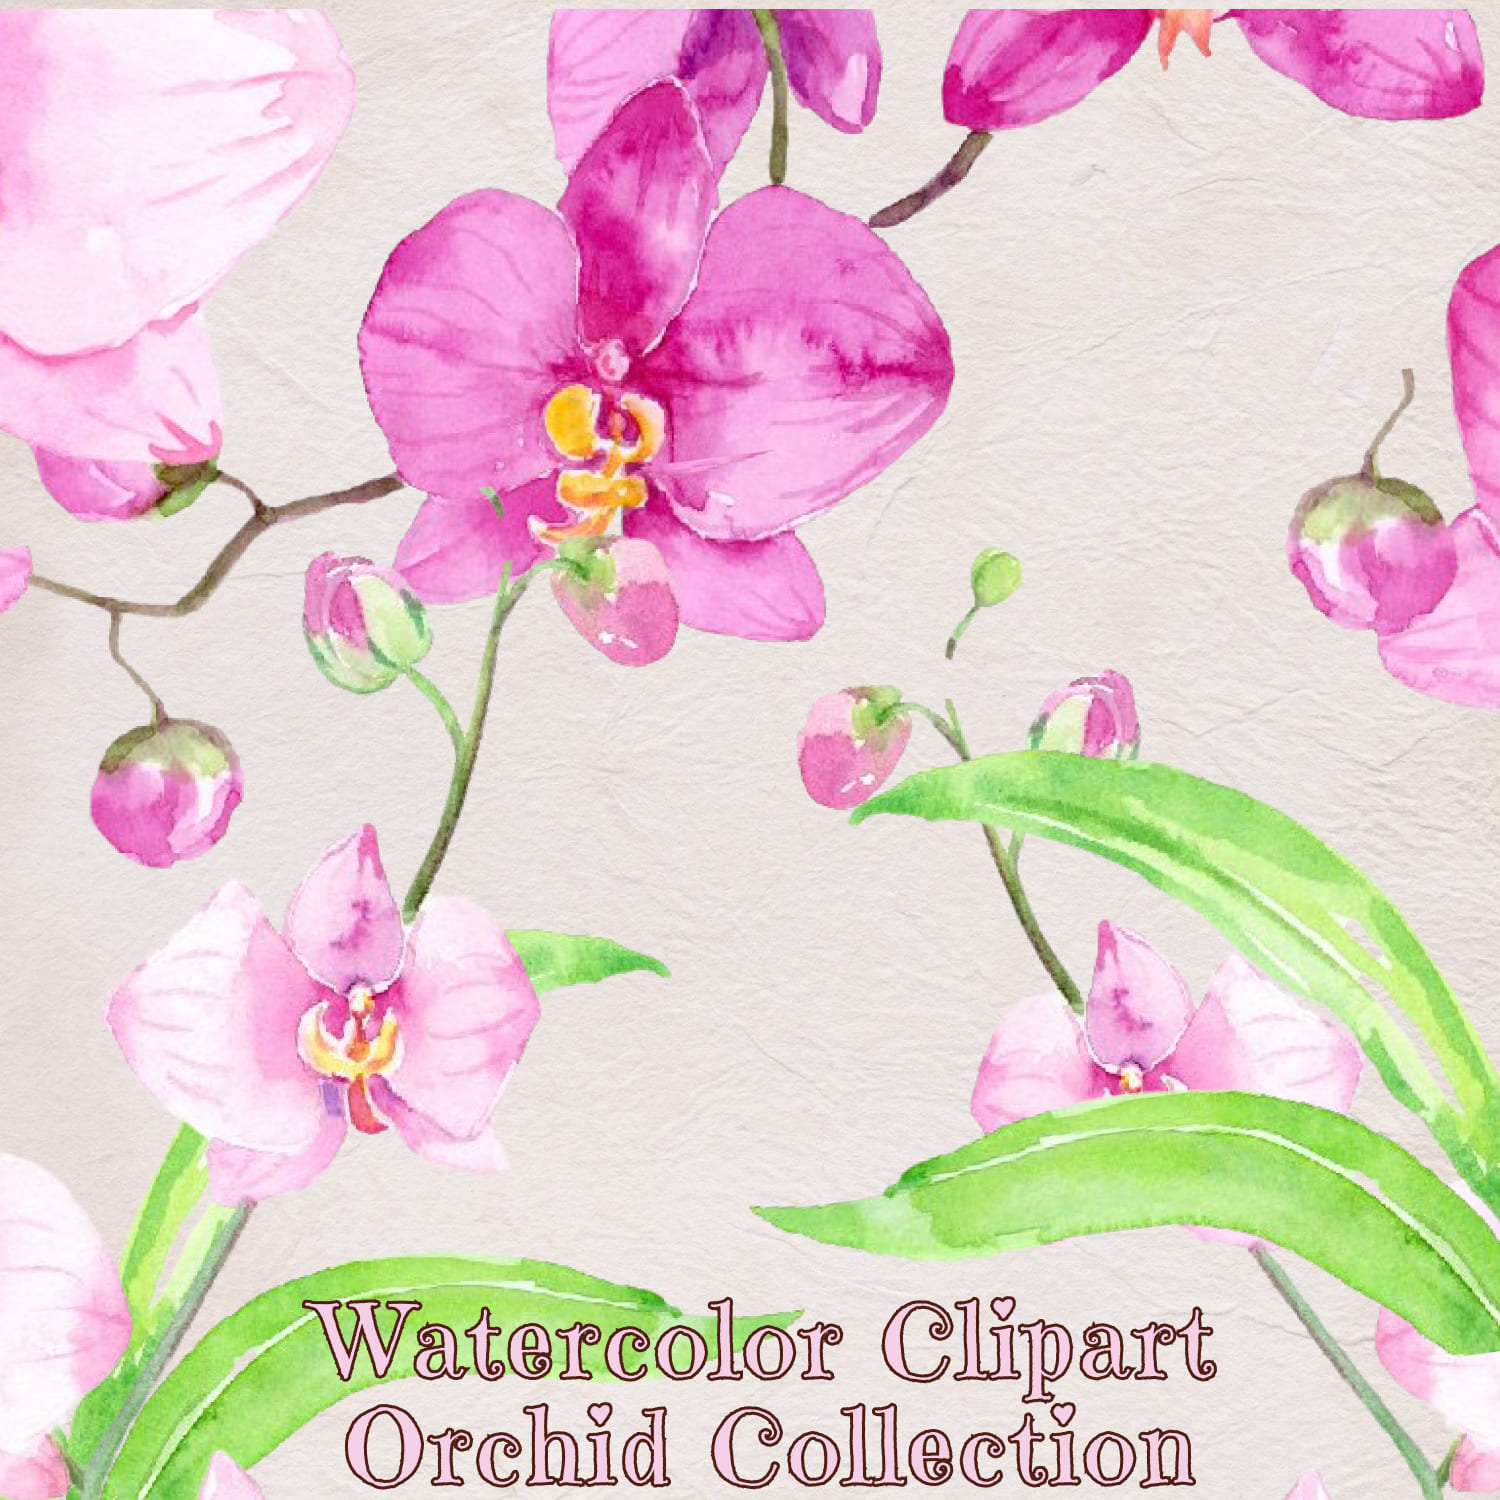 Hand painted watercolor clipart Orchid Collection.